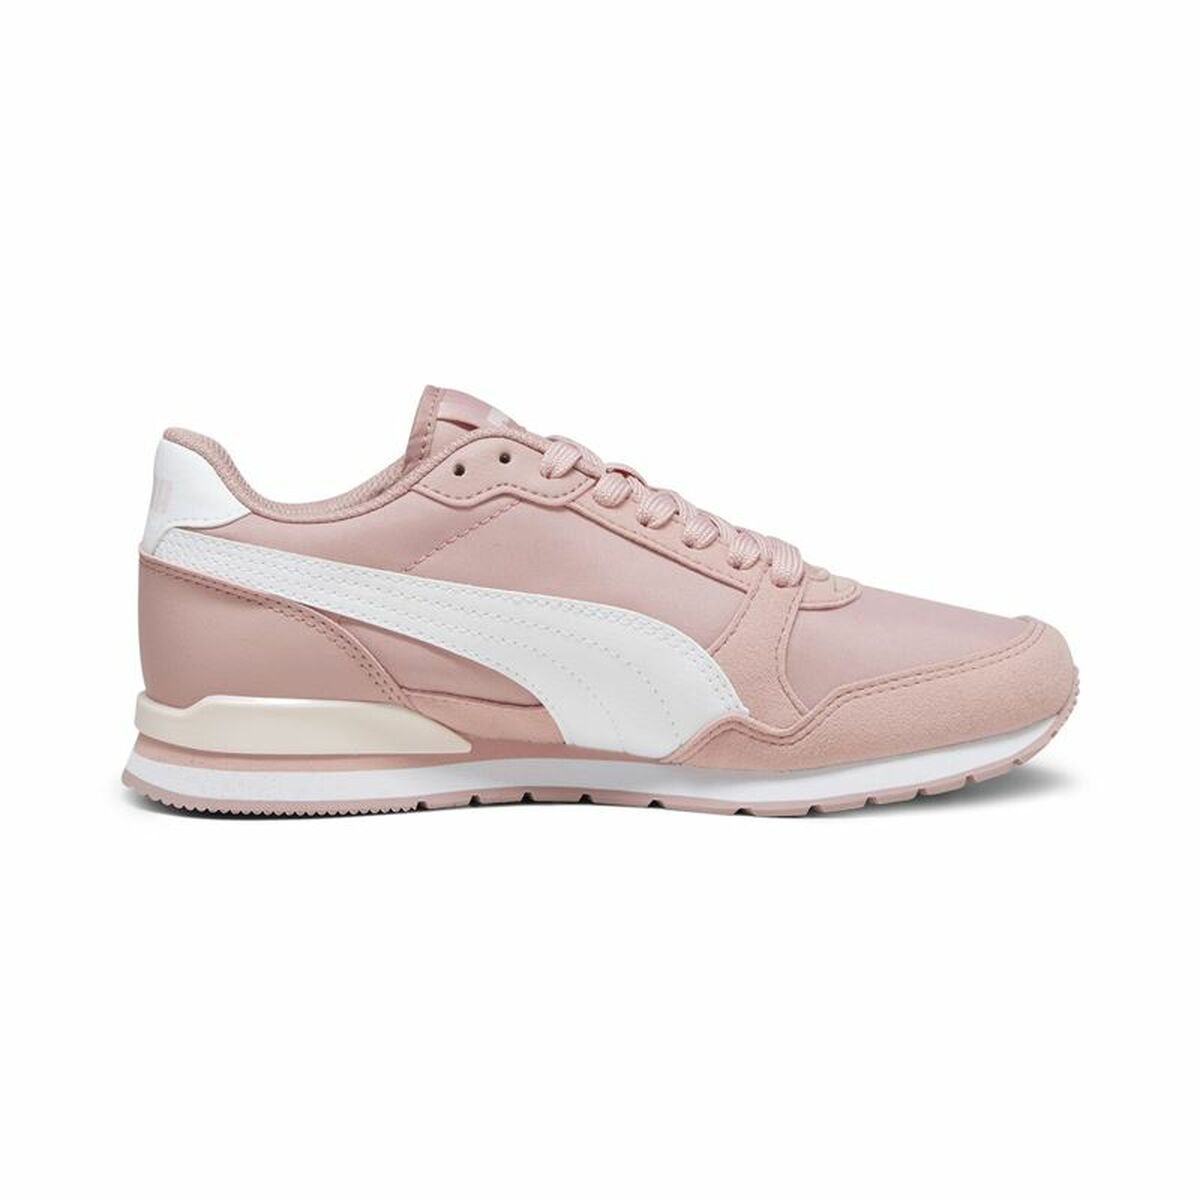 Women's casual trainers Puma St Runner V3 Nl Pink